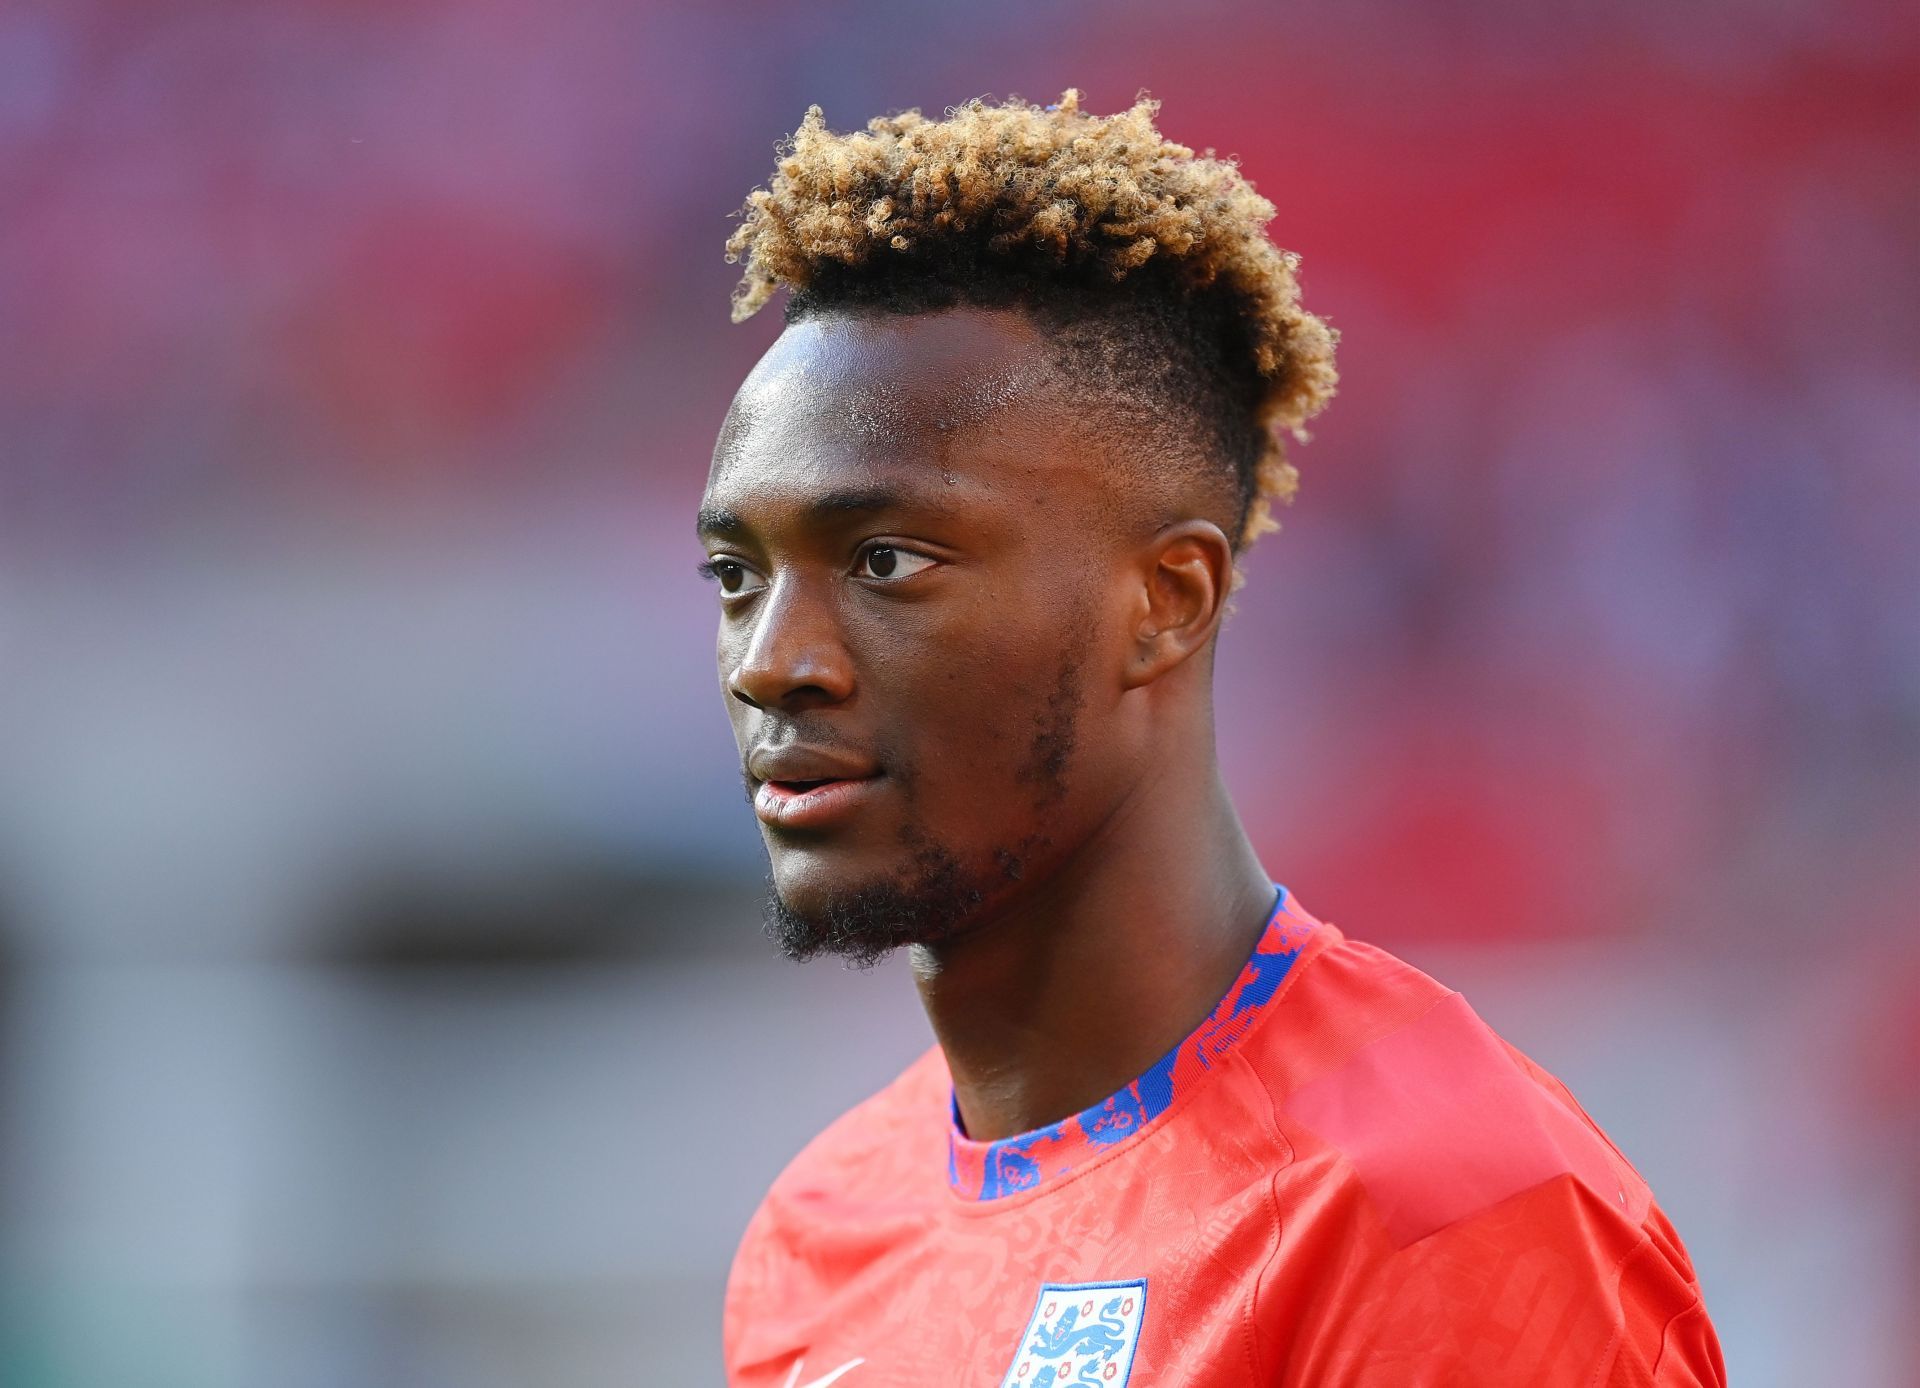 Tammy Abraham has been on fire since arriving in Rome.